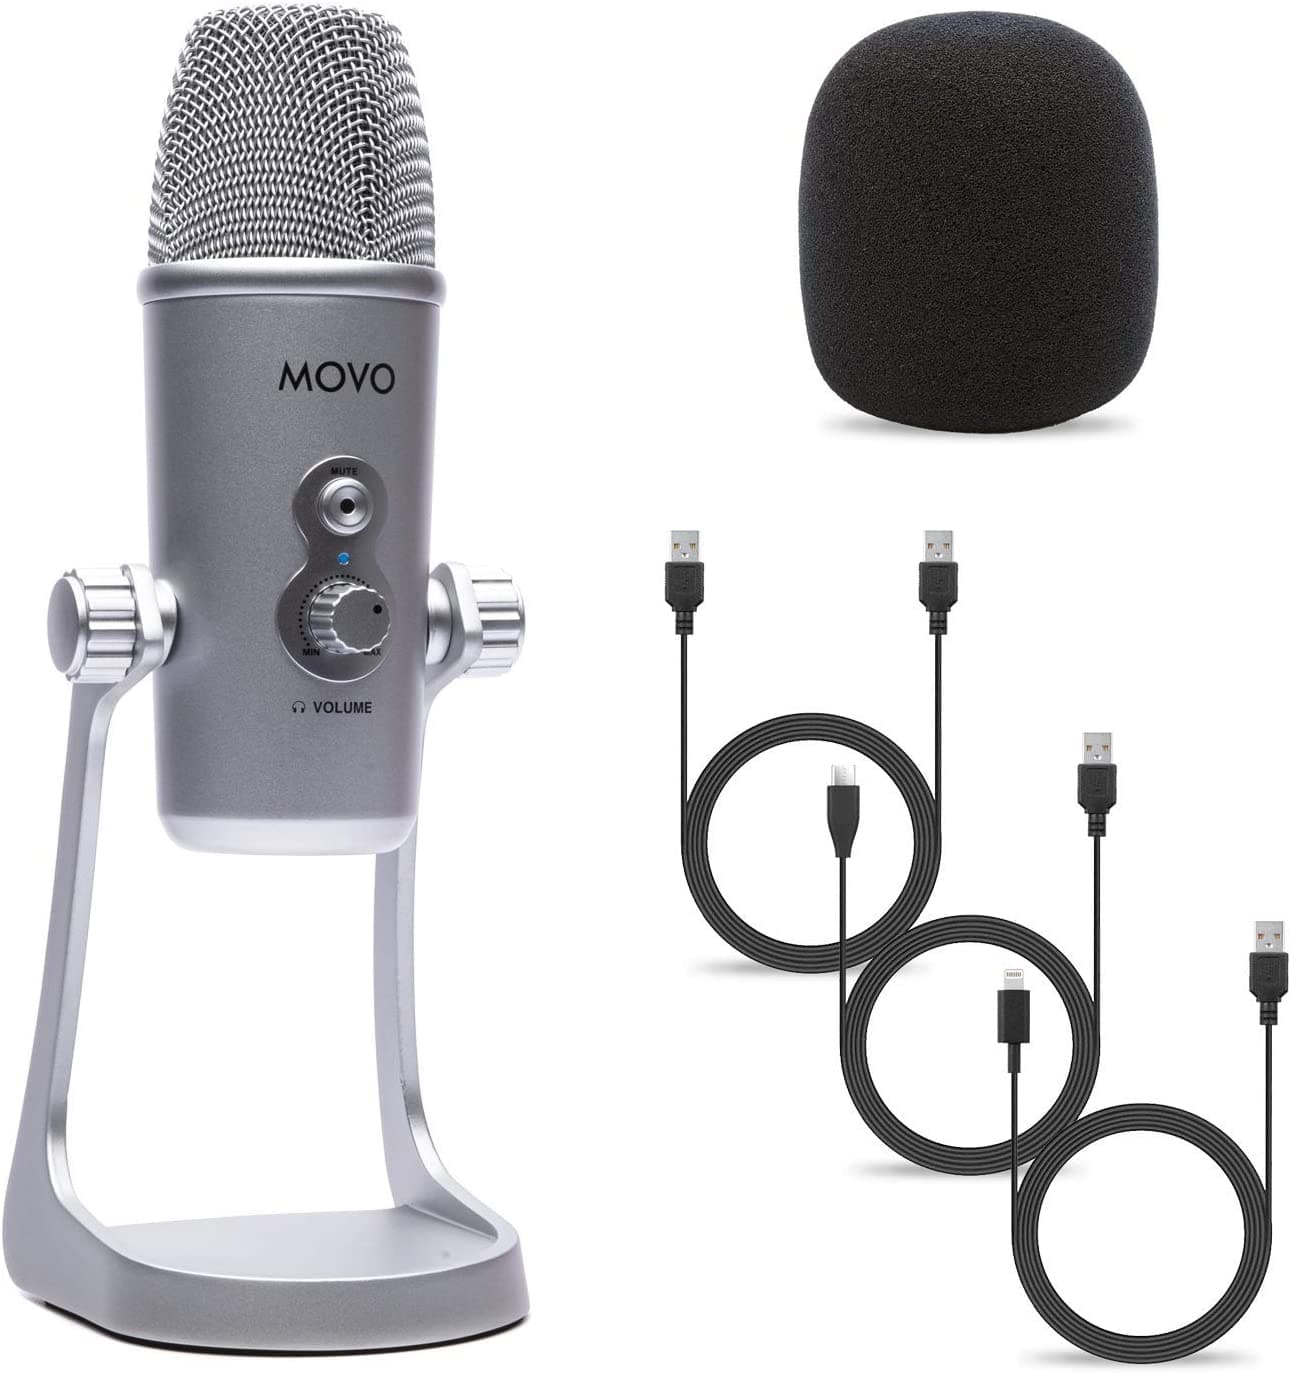 Movo MA5L External Microphone for iPhone, iPad, iOS - Mini Mic for iPhone  with MFi-Certified Lightning Jack, 180° Swivel - Apple Smartphone  Microphone